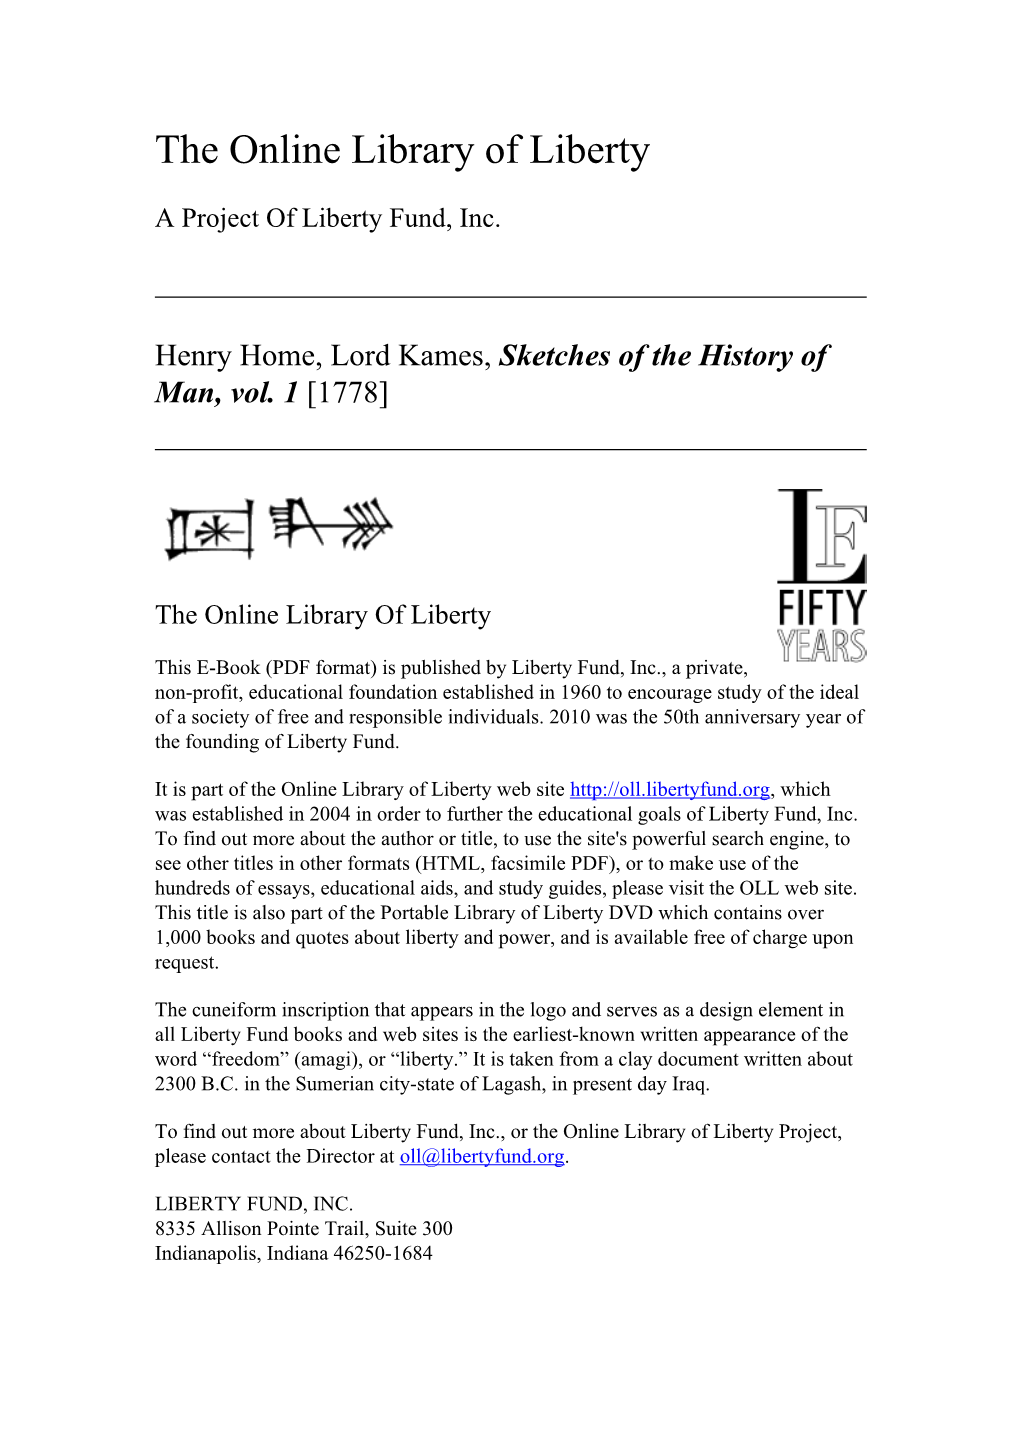 Online Library of Liberty: Sketches of the History of Man, Vol